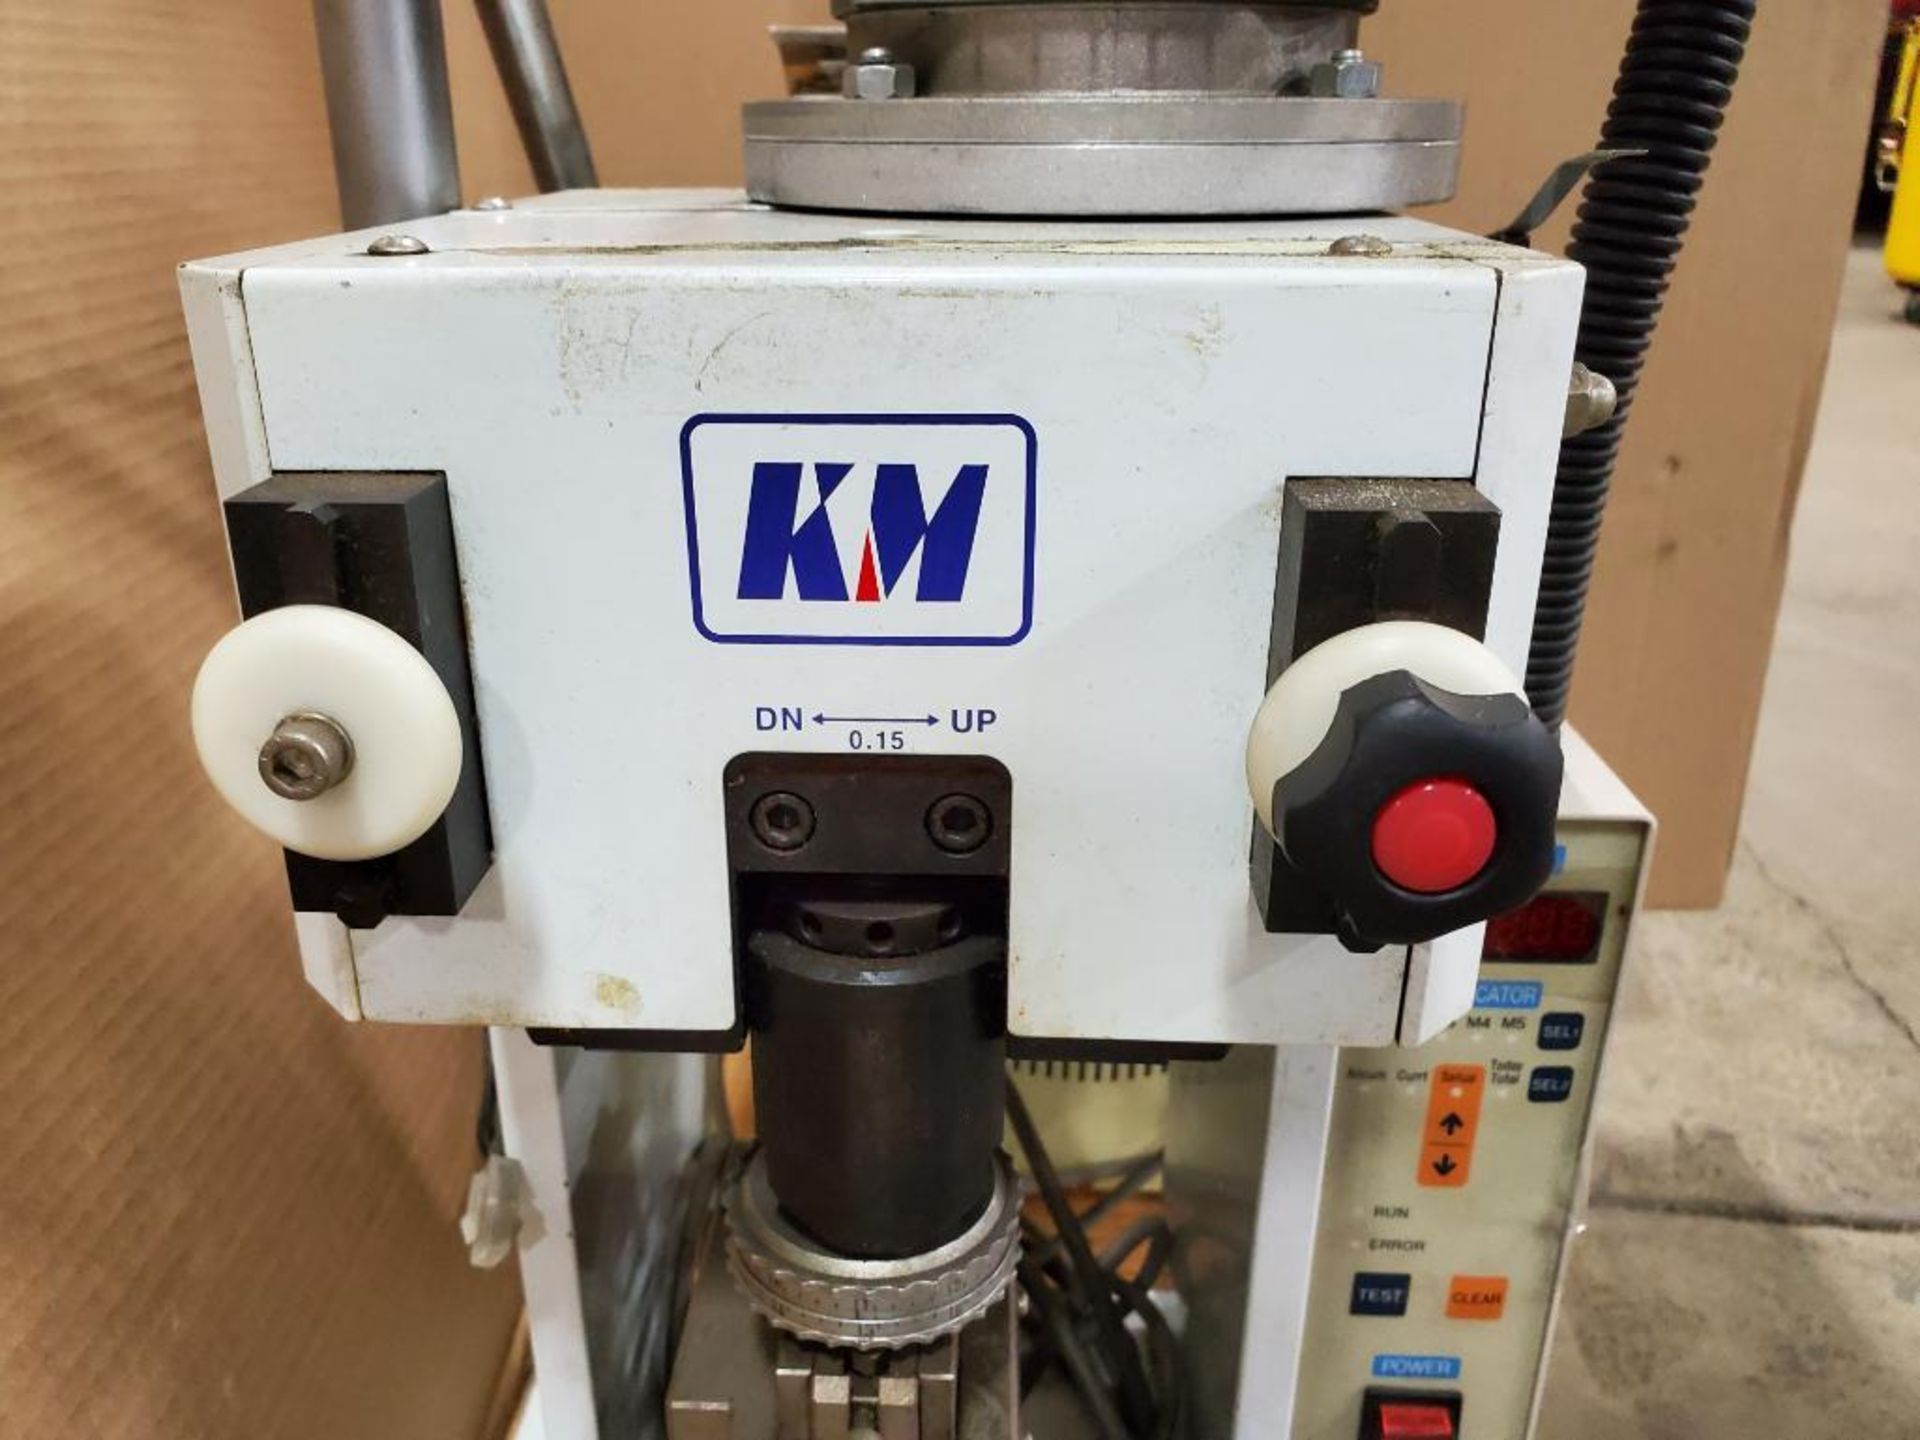 KM Digitech terminal crimping machine. Model KM-802N. Includes spade connector die as pictured. - Image 6 of 10